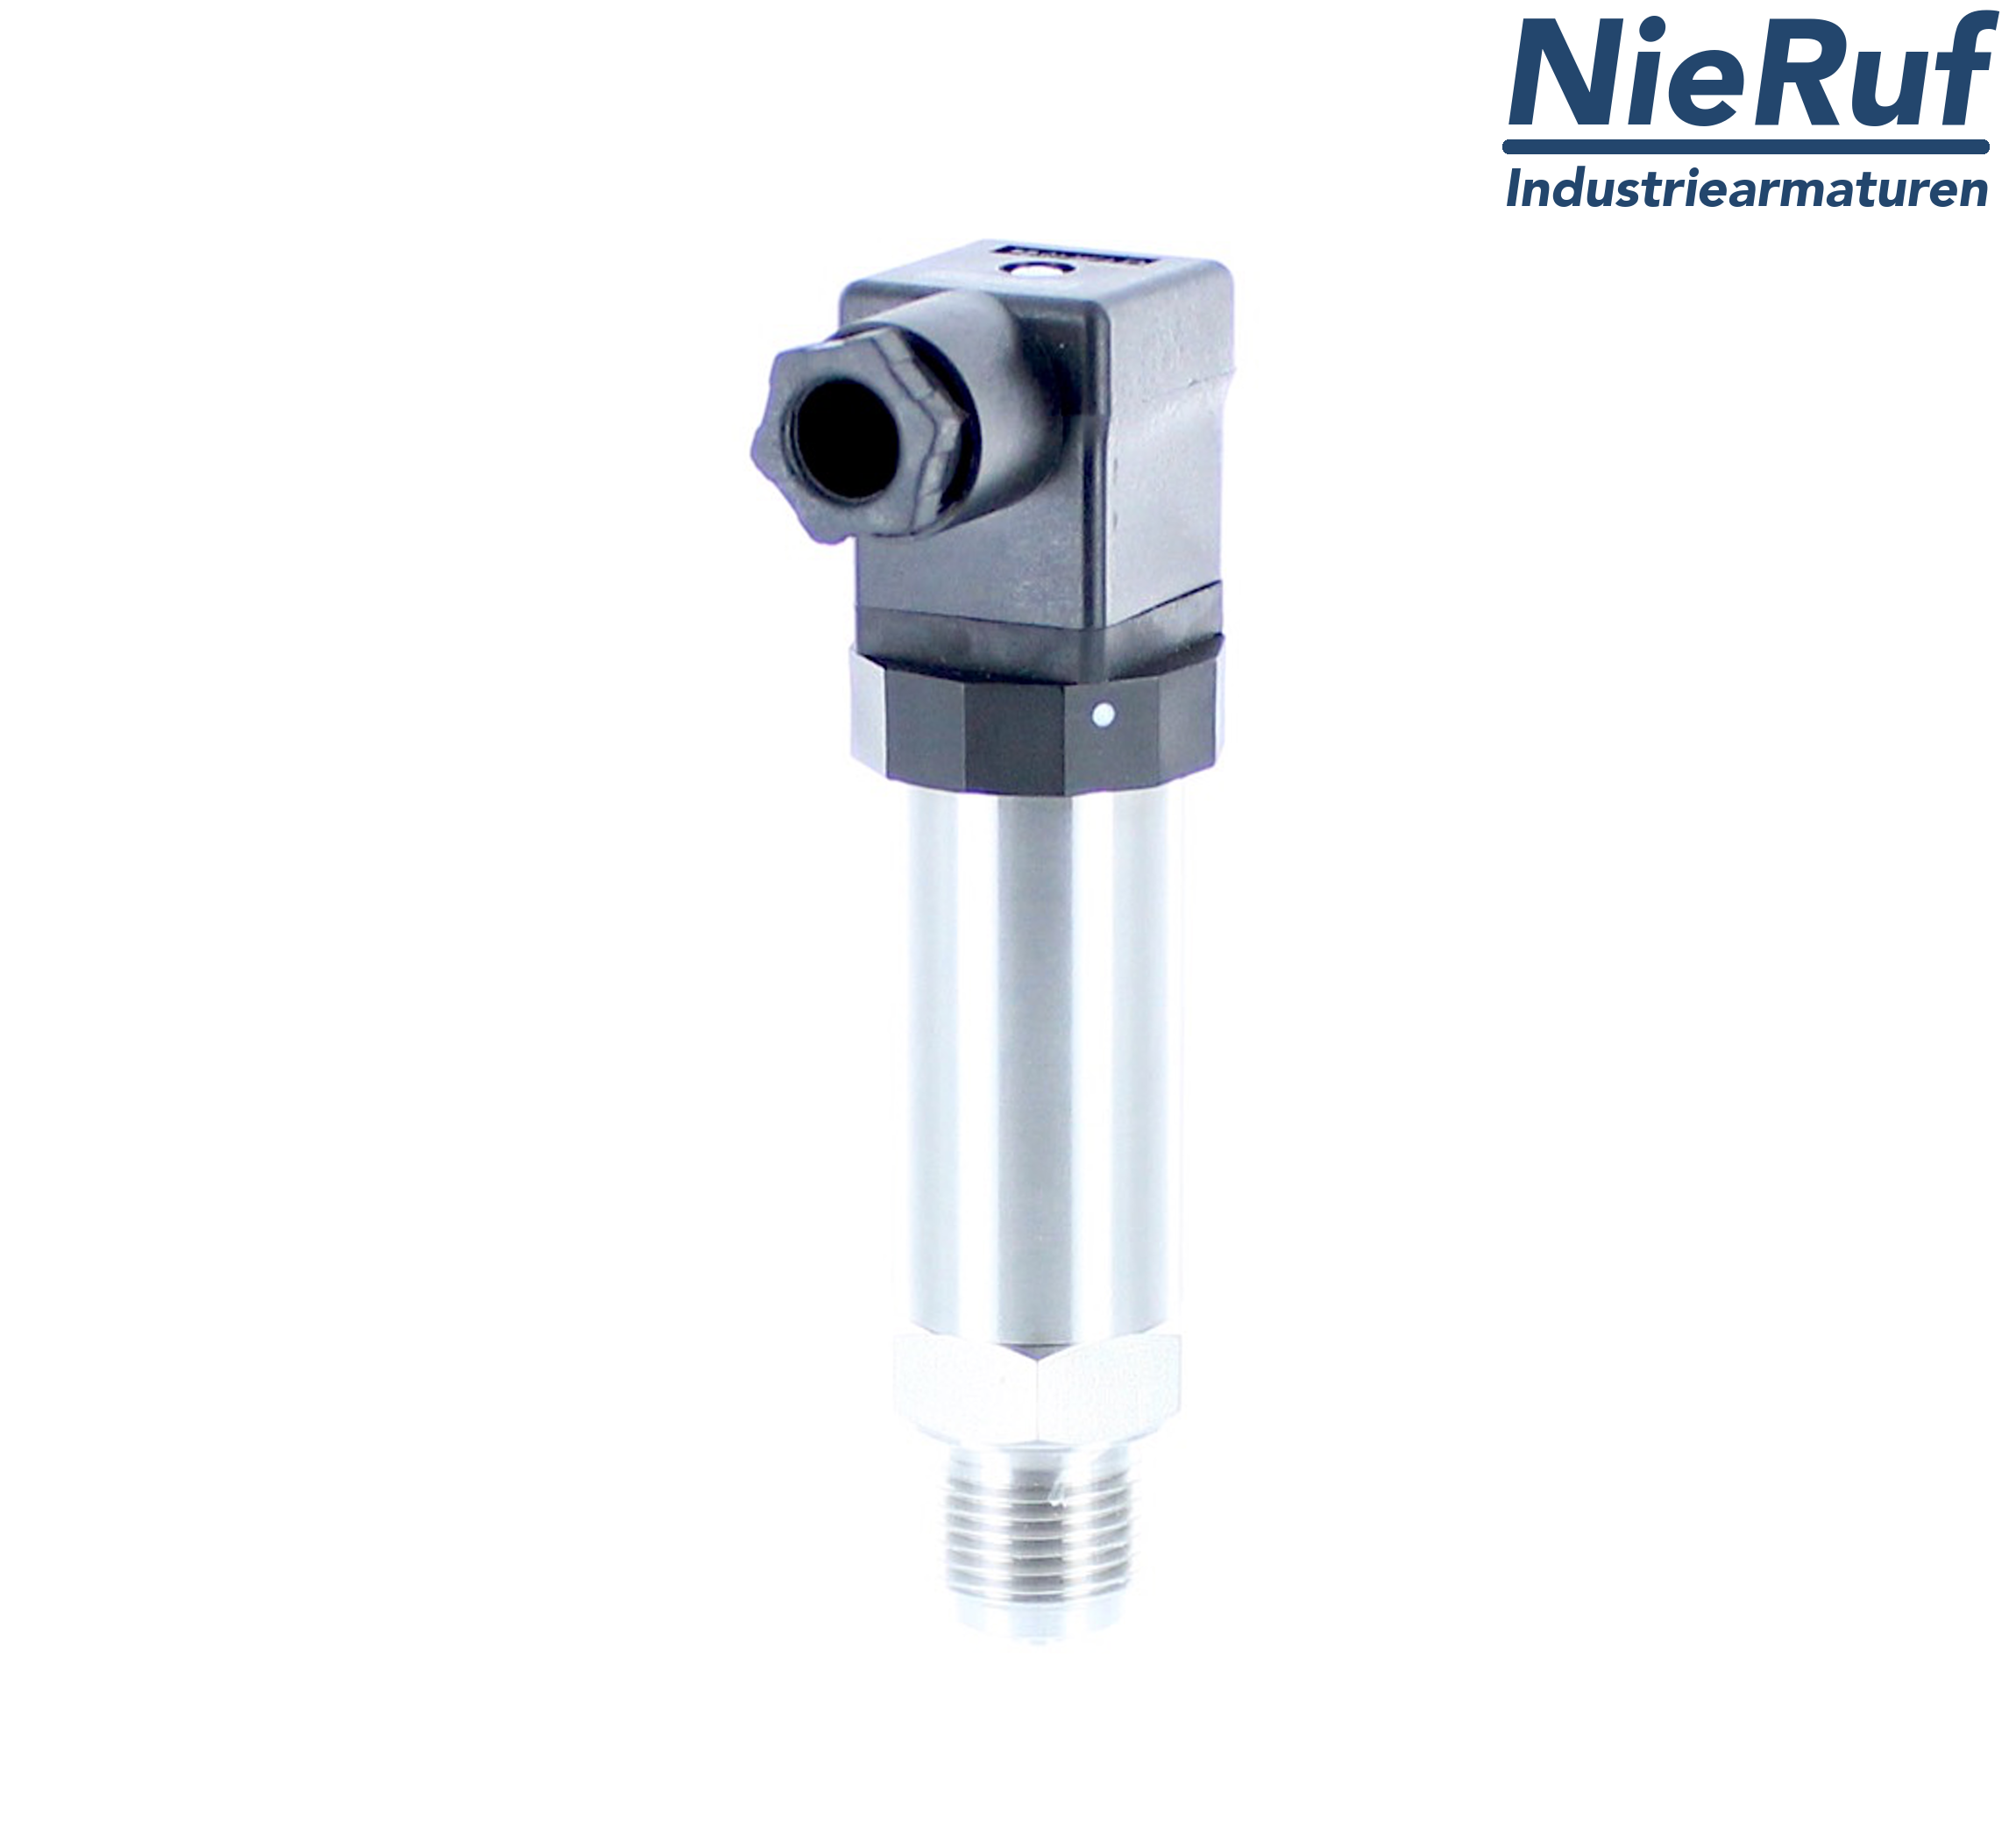 pressure sensor G 1/4" B DS01 stainless steel 2-wire: 4-20mA FPM 0,0 - 4,0 bar